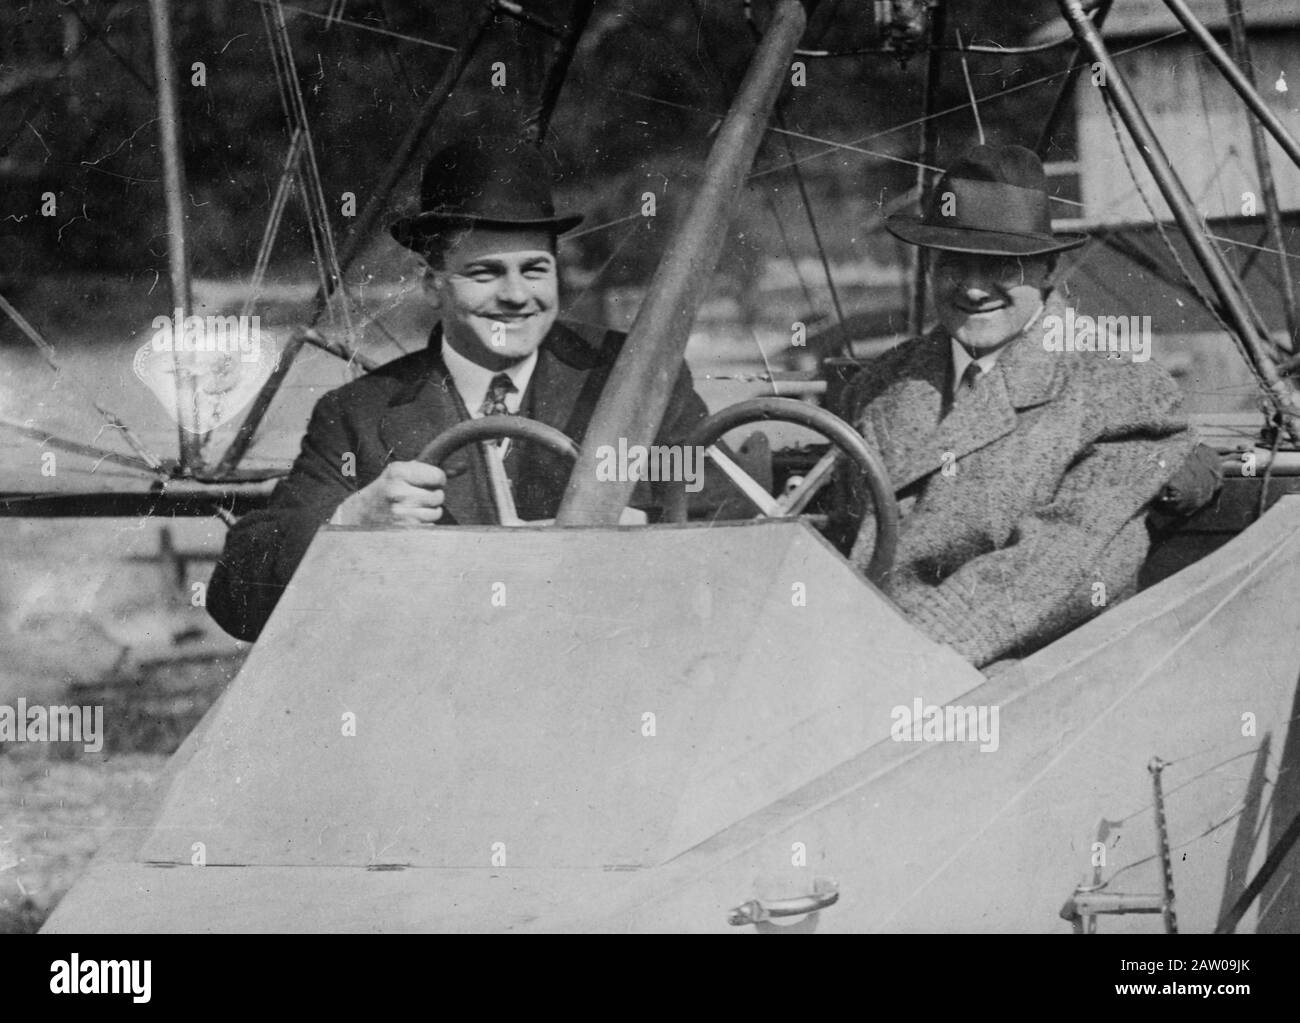 F.J. Bersbach and Harold F. McCormick (1872-1941) seated in a Curtiss Hydro-Aeroplane (flying boat) owned by Logan 'Jack' Vilas (1891-1976). Stock Photo